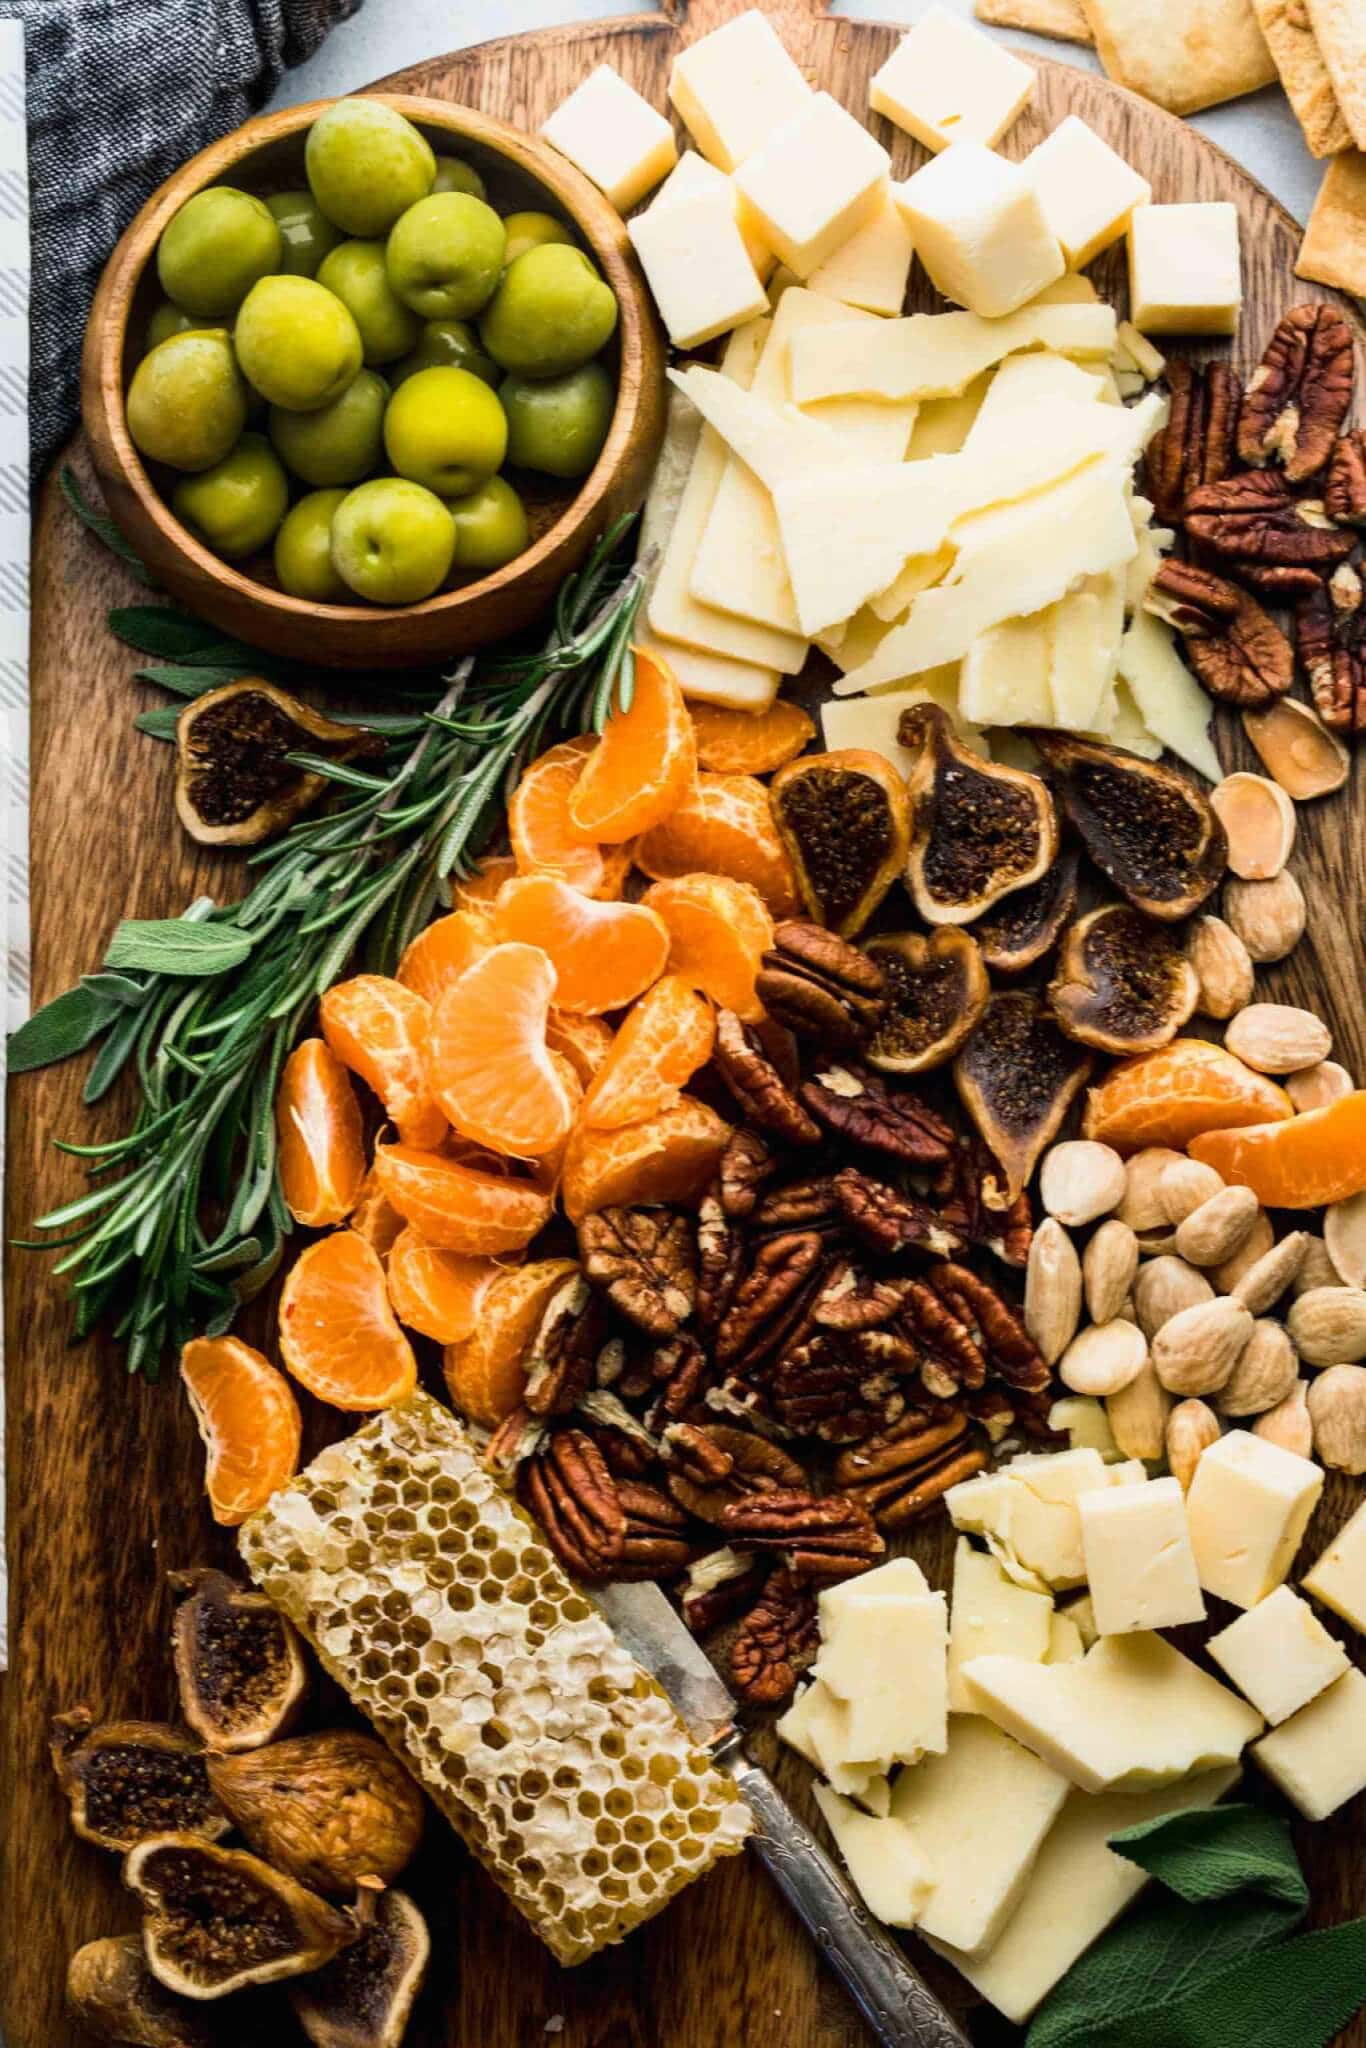 Close up of cheeses, nuts, olives and fruits arranged on wooden serving board.